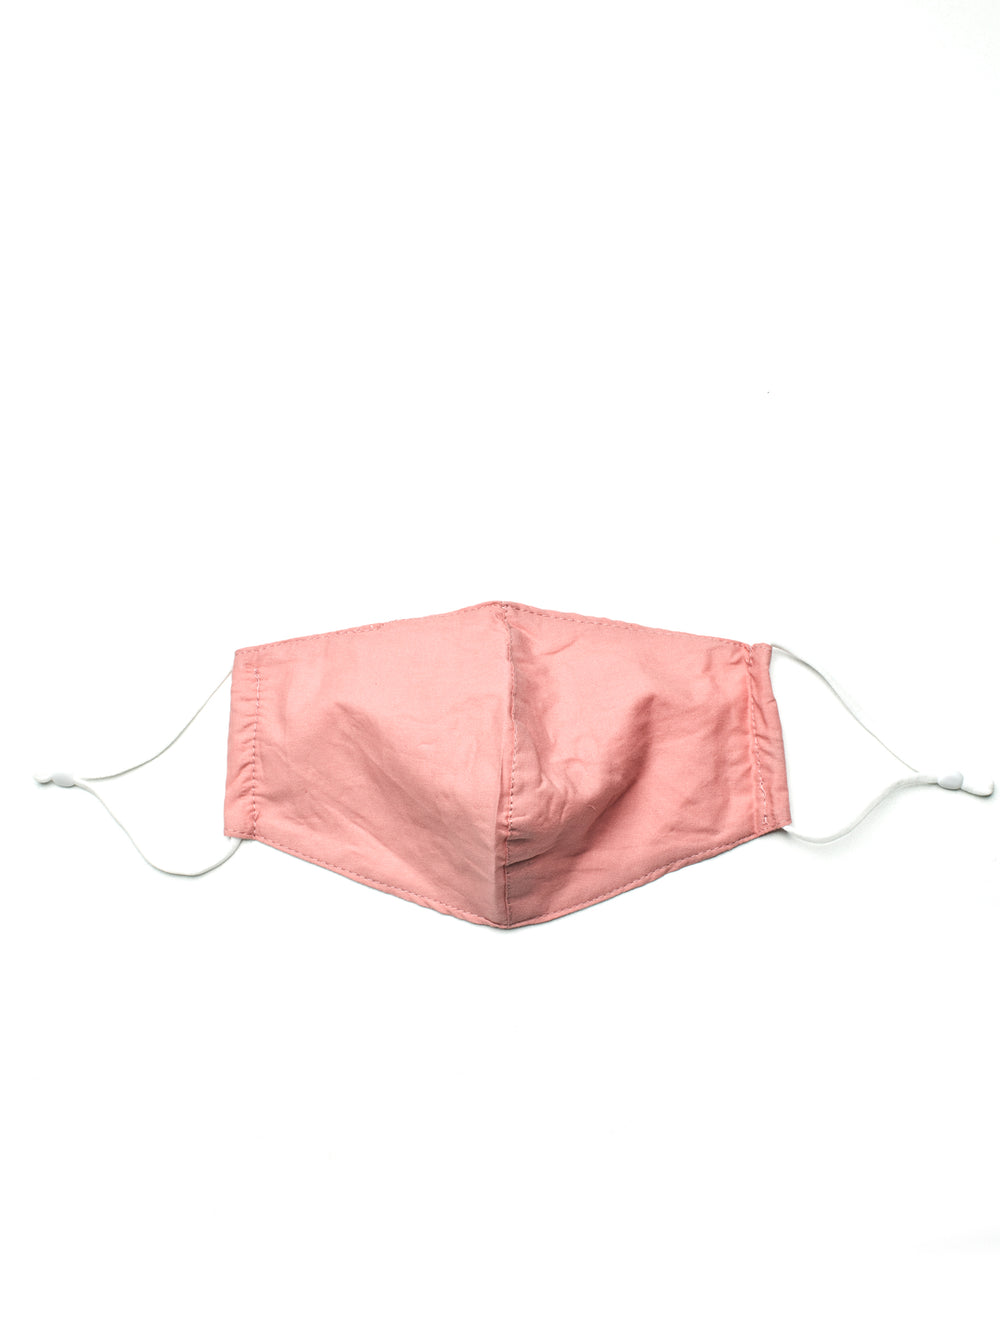 KW FASHION CORP SOLID MASK - DUST PINK - CLEARANCE